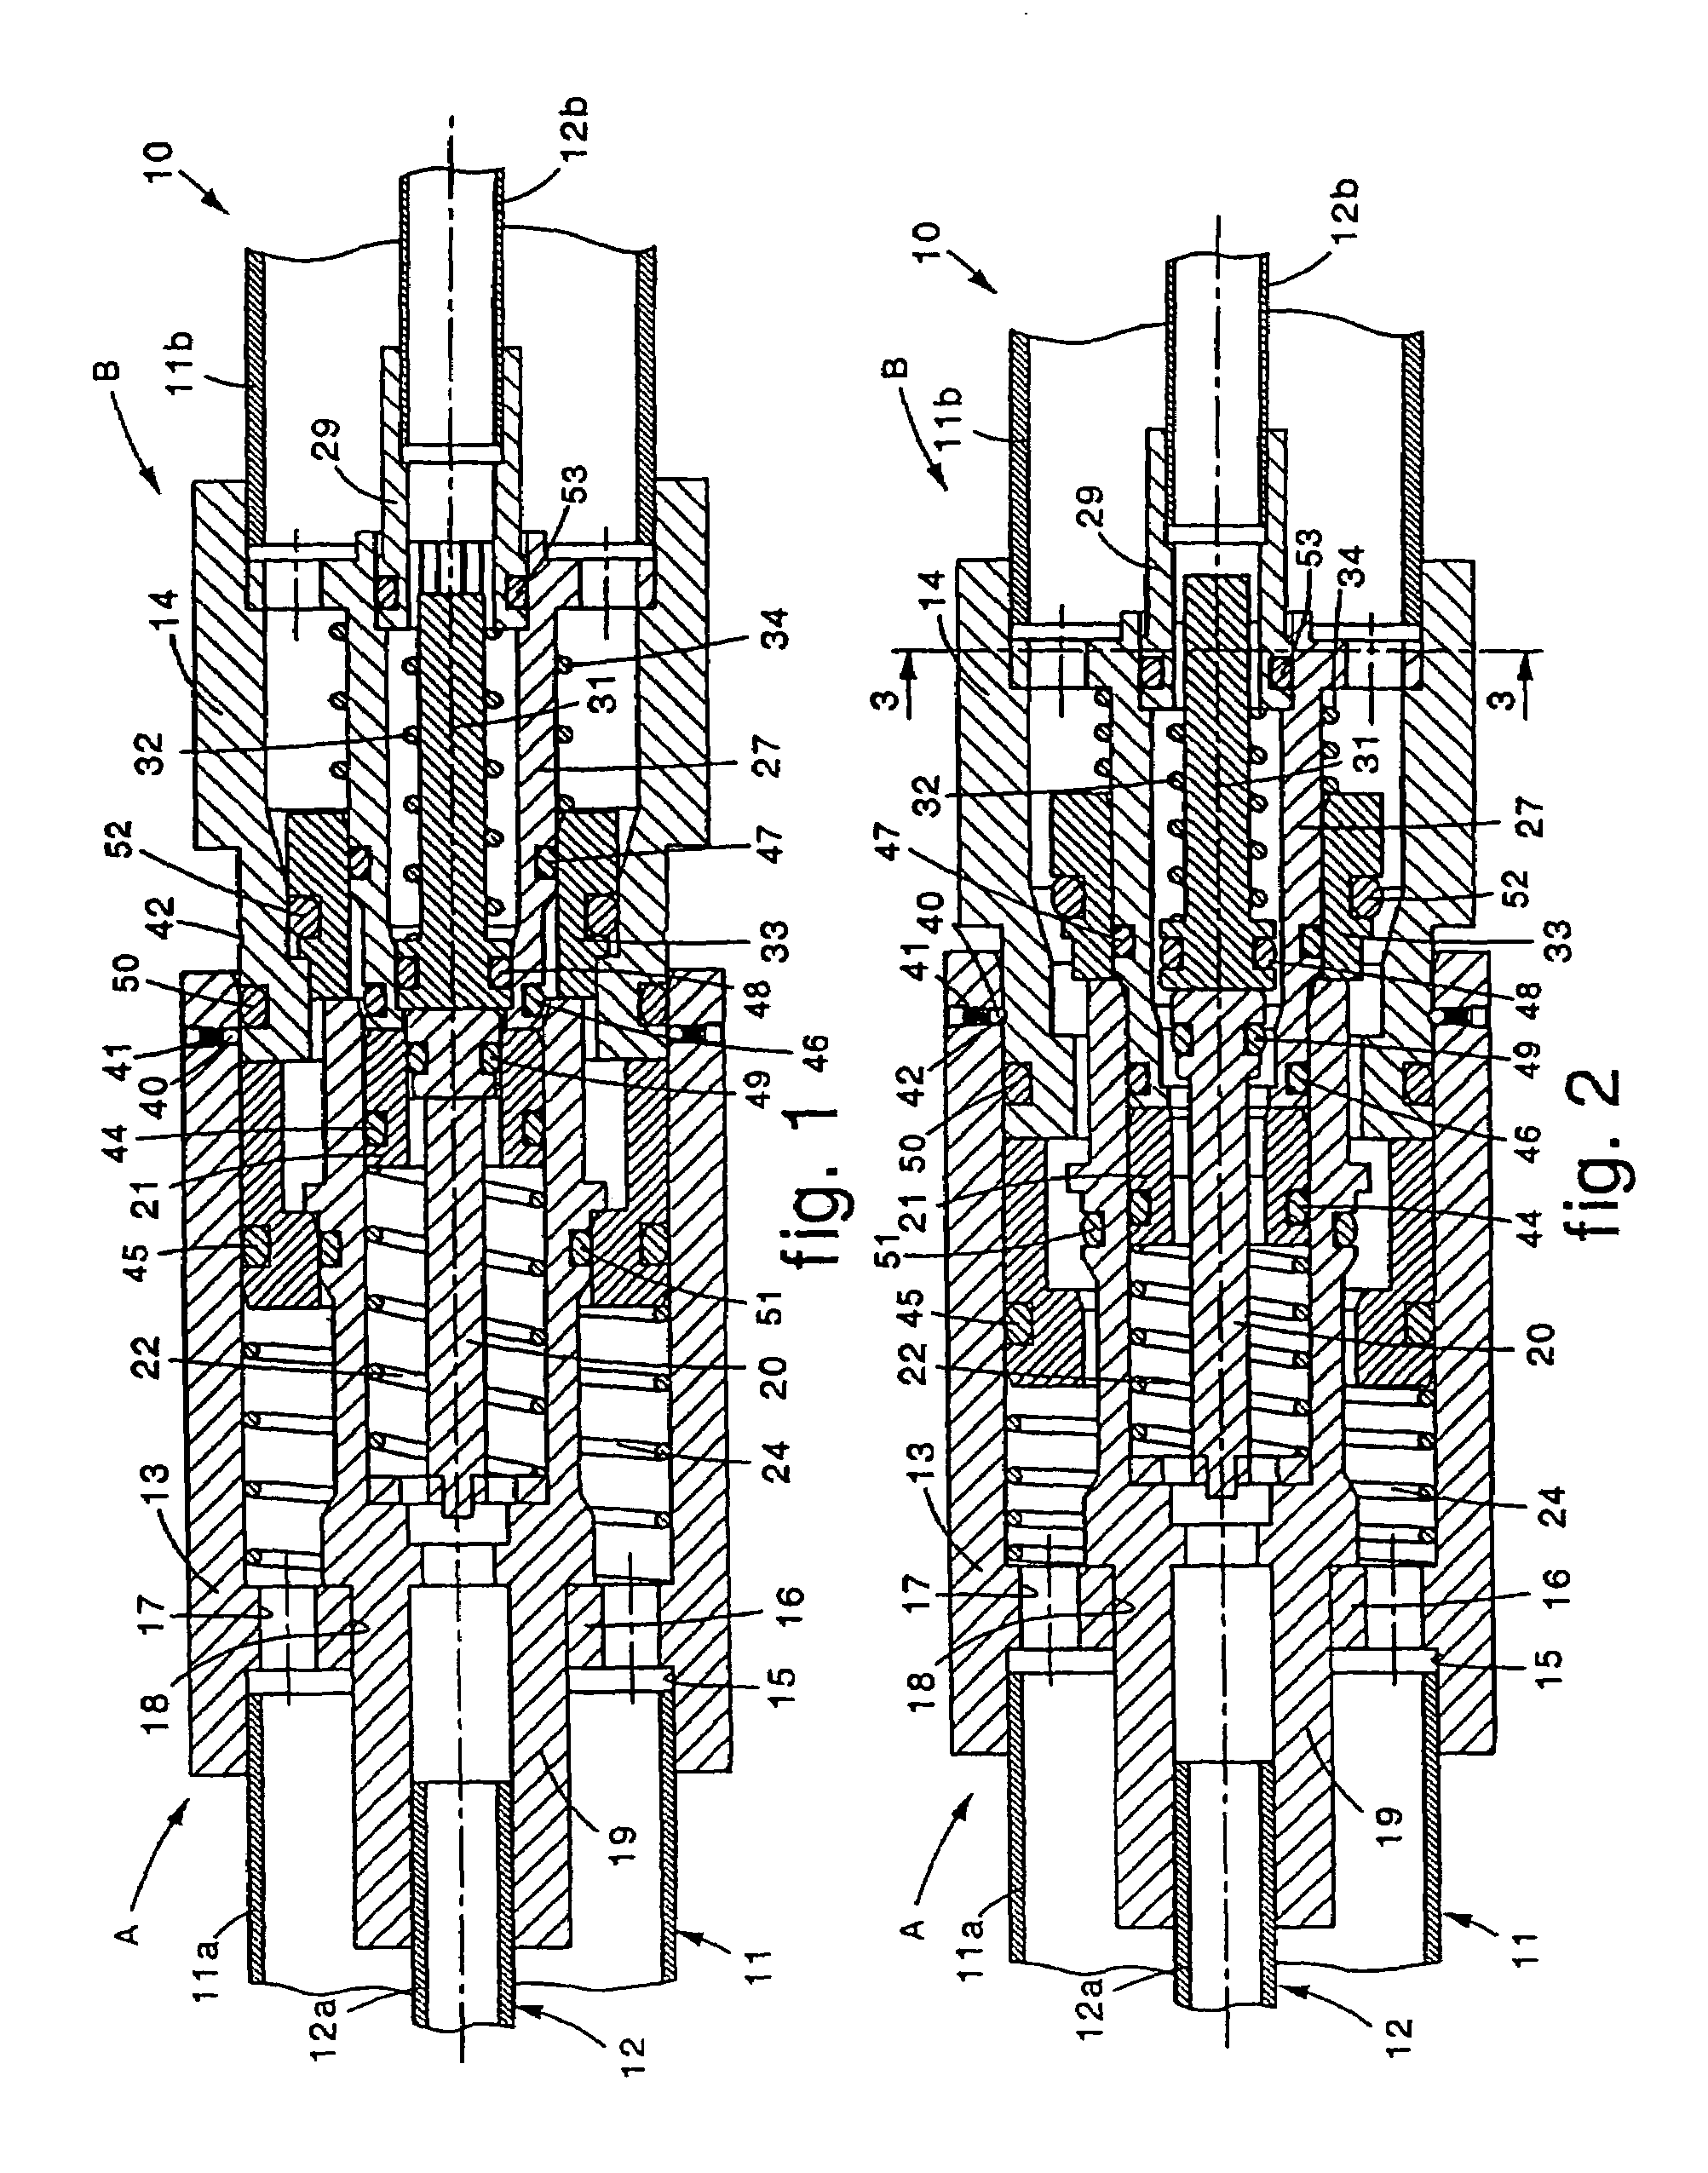 Joint-type coaxial connection